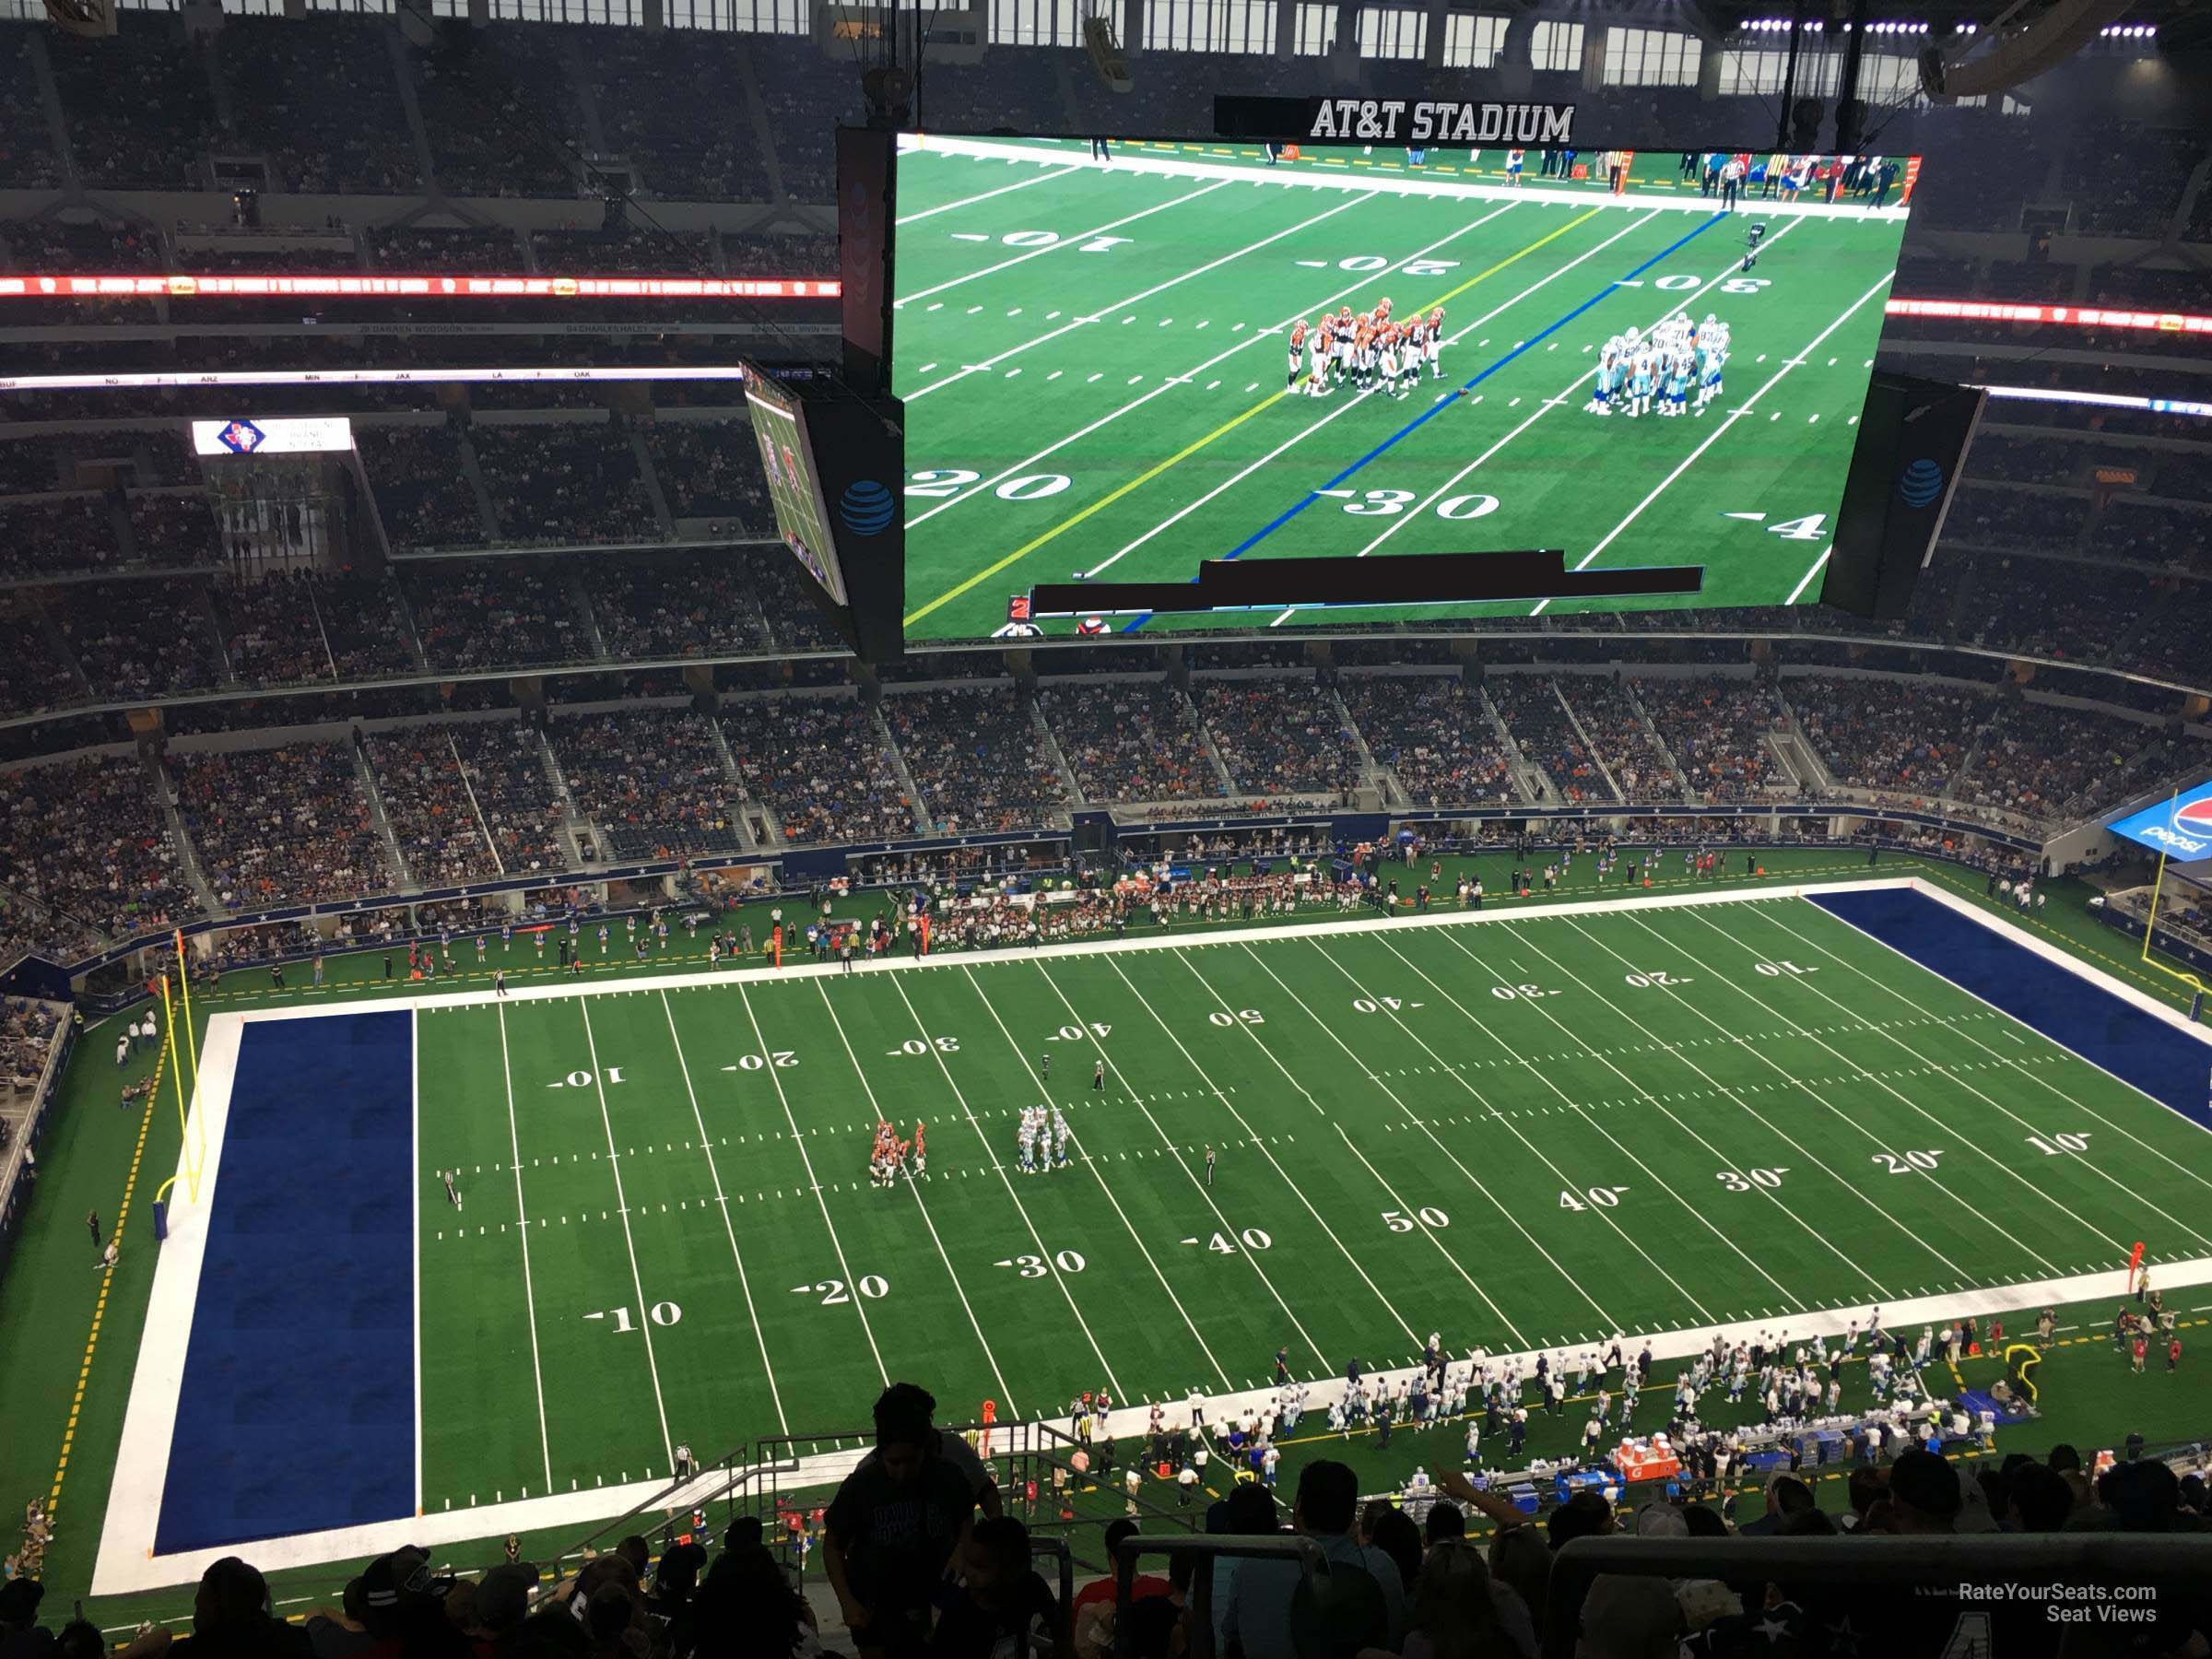 section 415, row 22 seat view  for football - at&t stadium (cowboys stadium)